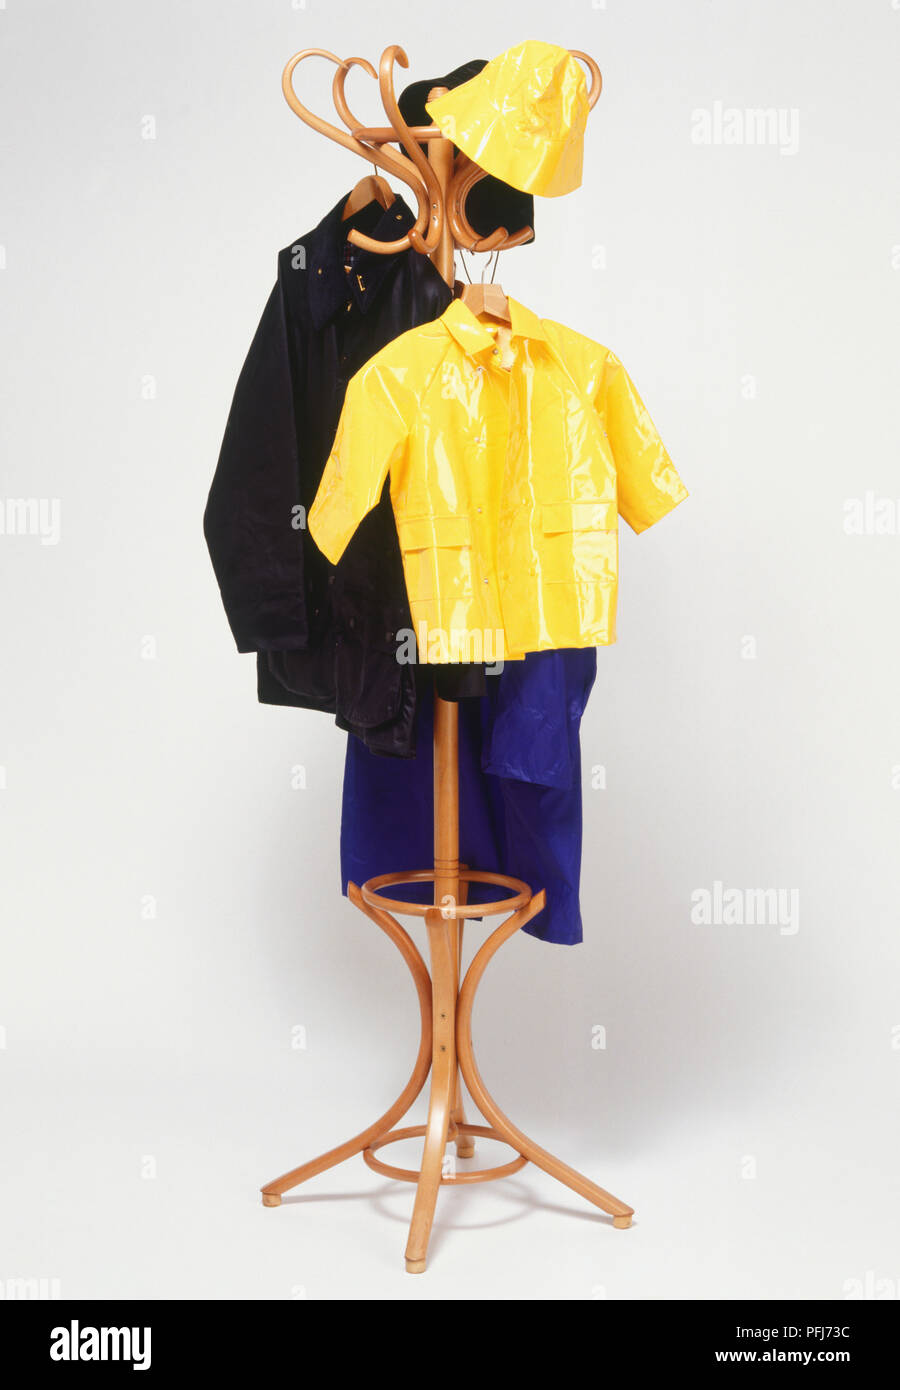 Coats and hats hanging on wooden coat stand, front view. Stock Photo